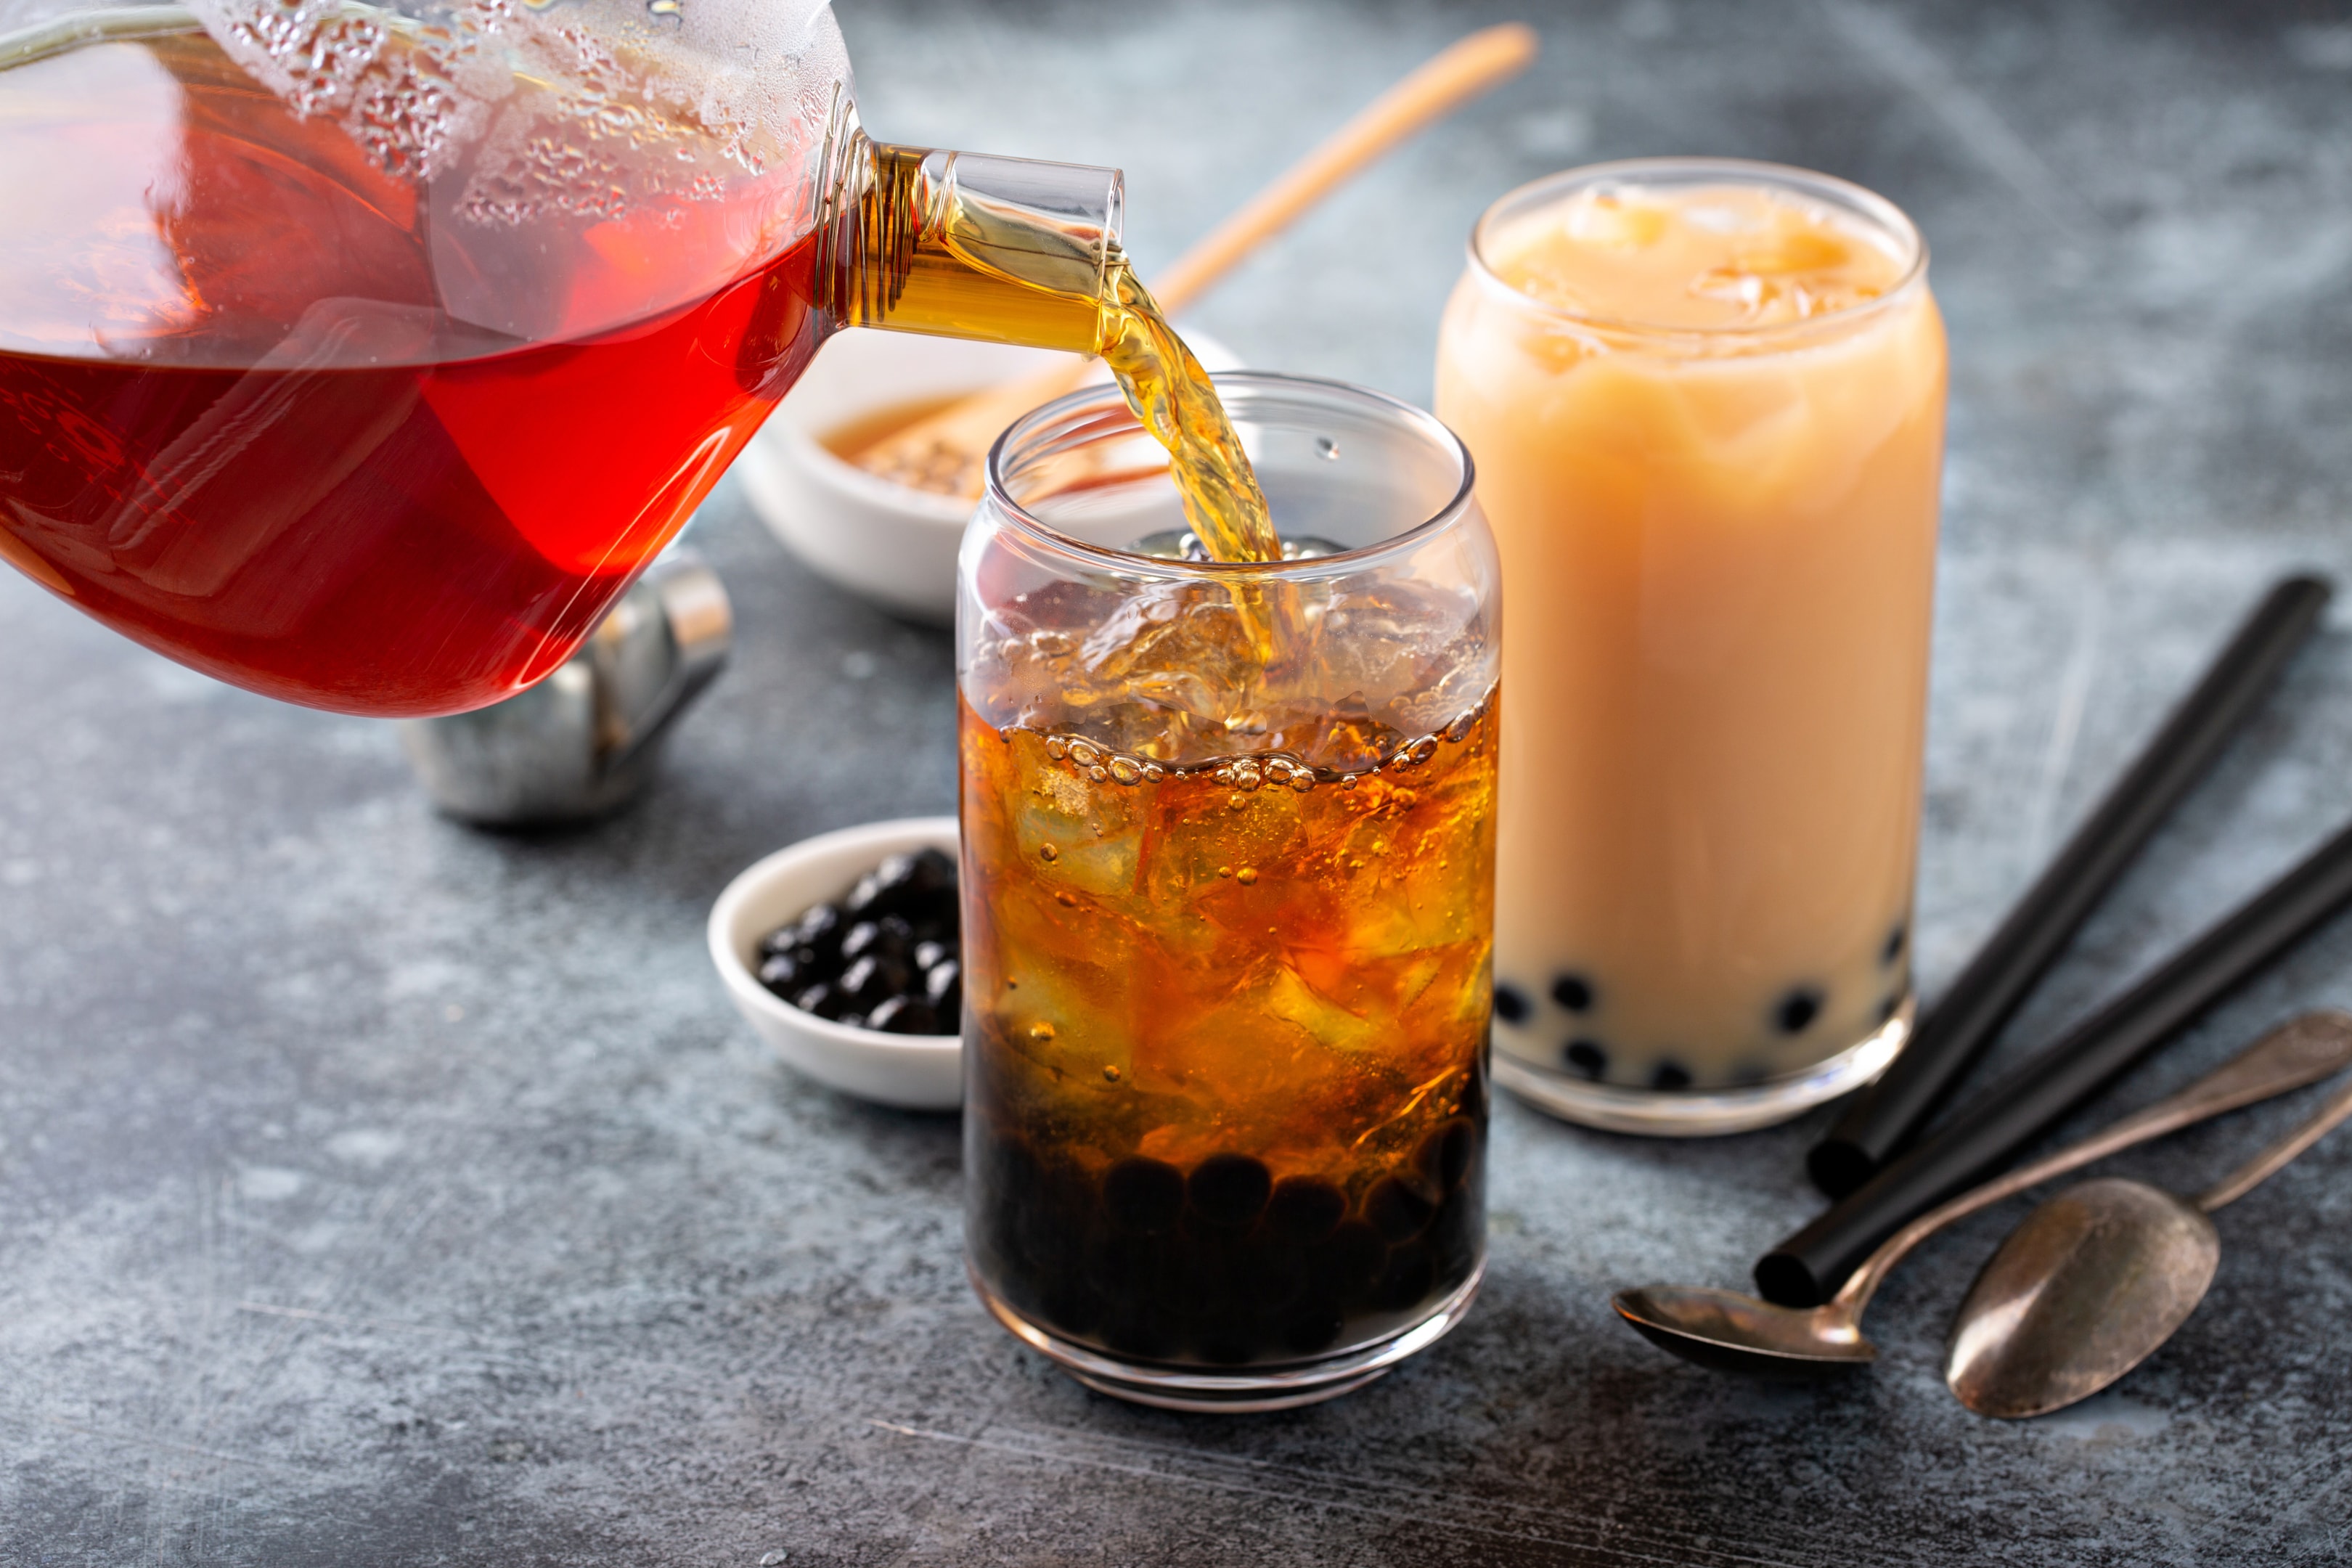 What Is Boba? Boba Tea Guide & Definitions